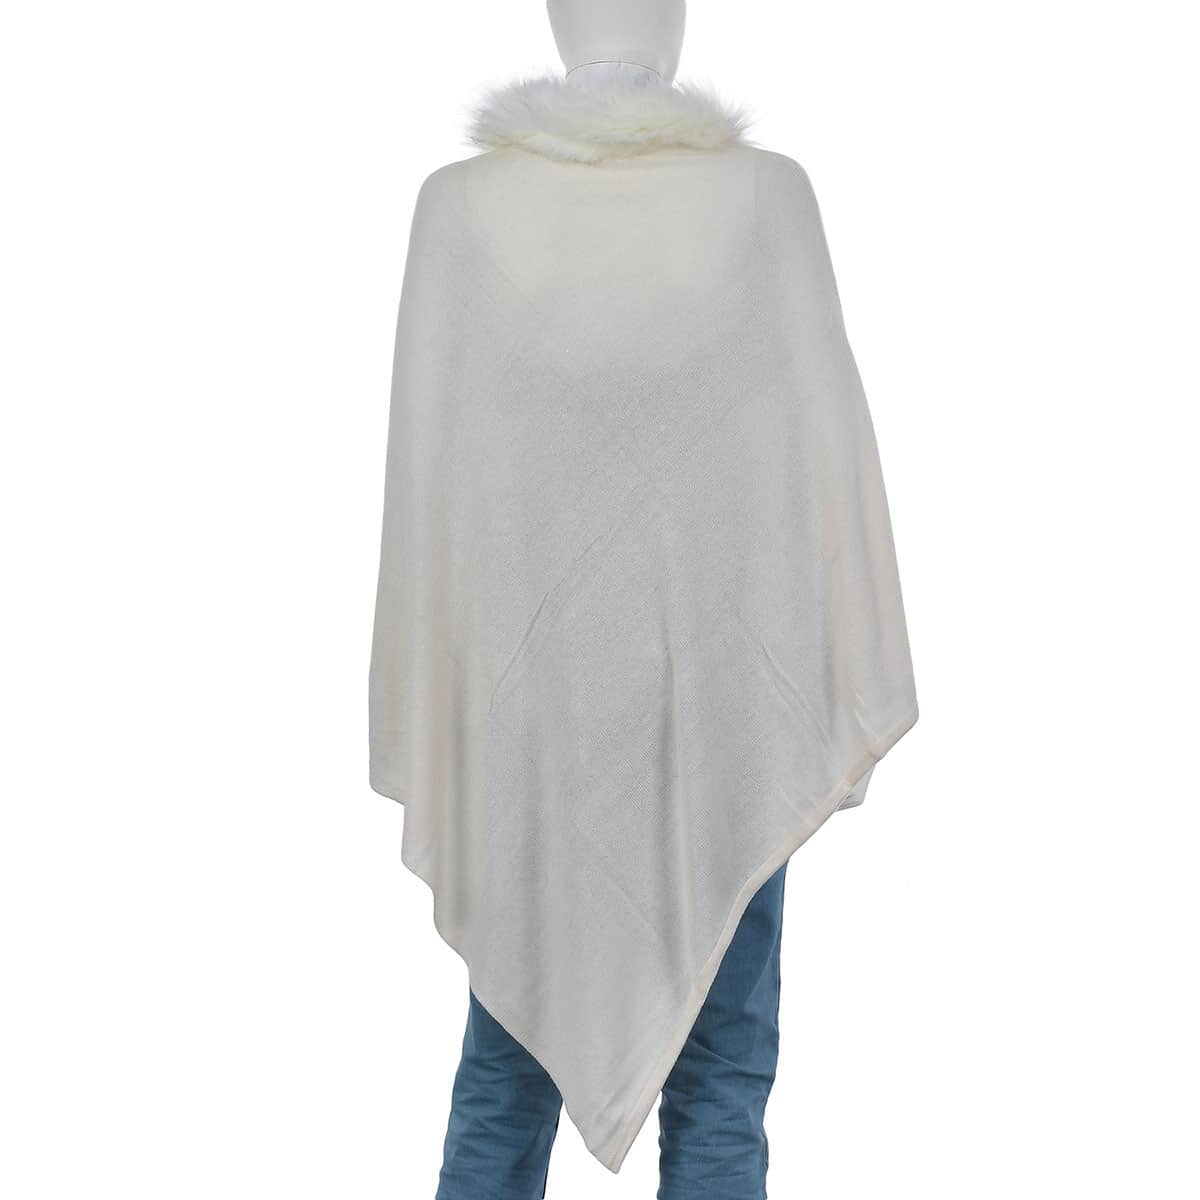 Off White Pashmina Wool Poncho with Faux Fur Collar (One Size Fits Most, Cashmere) image number 1